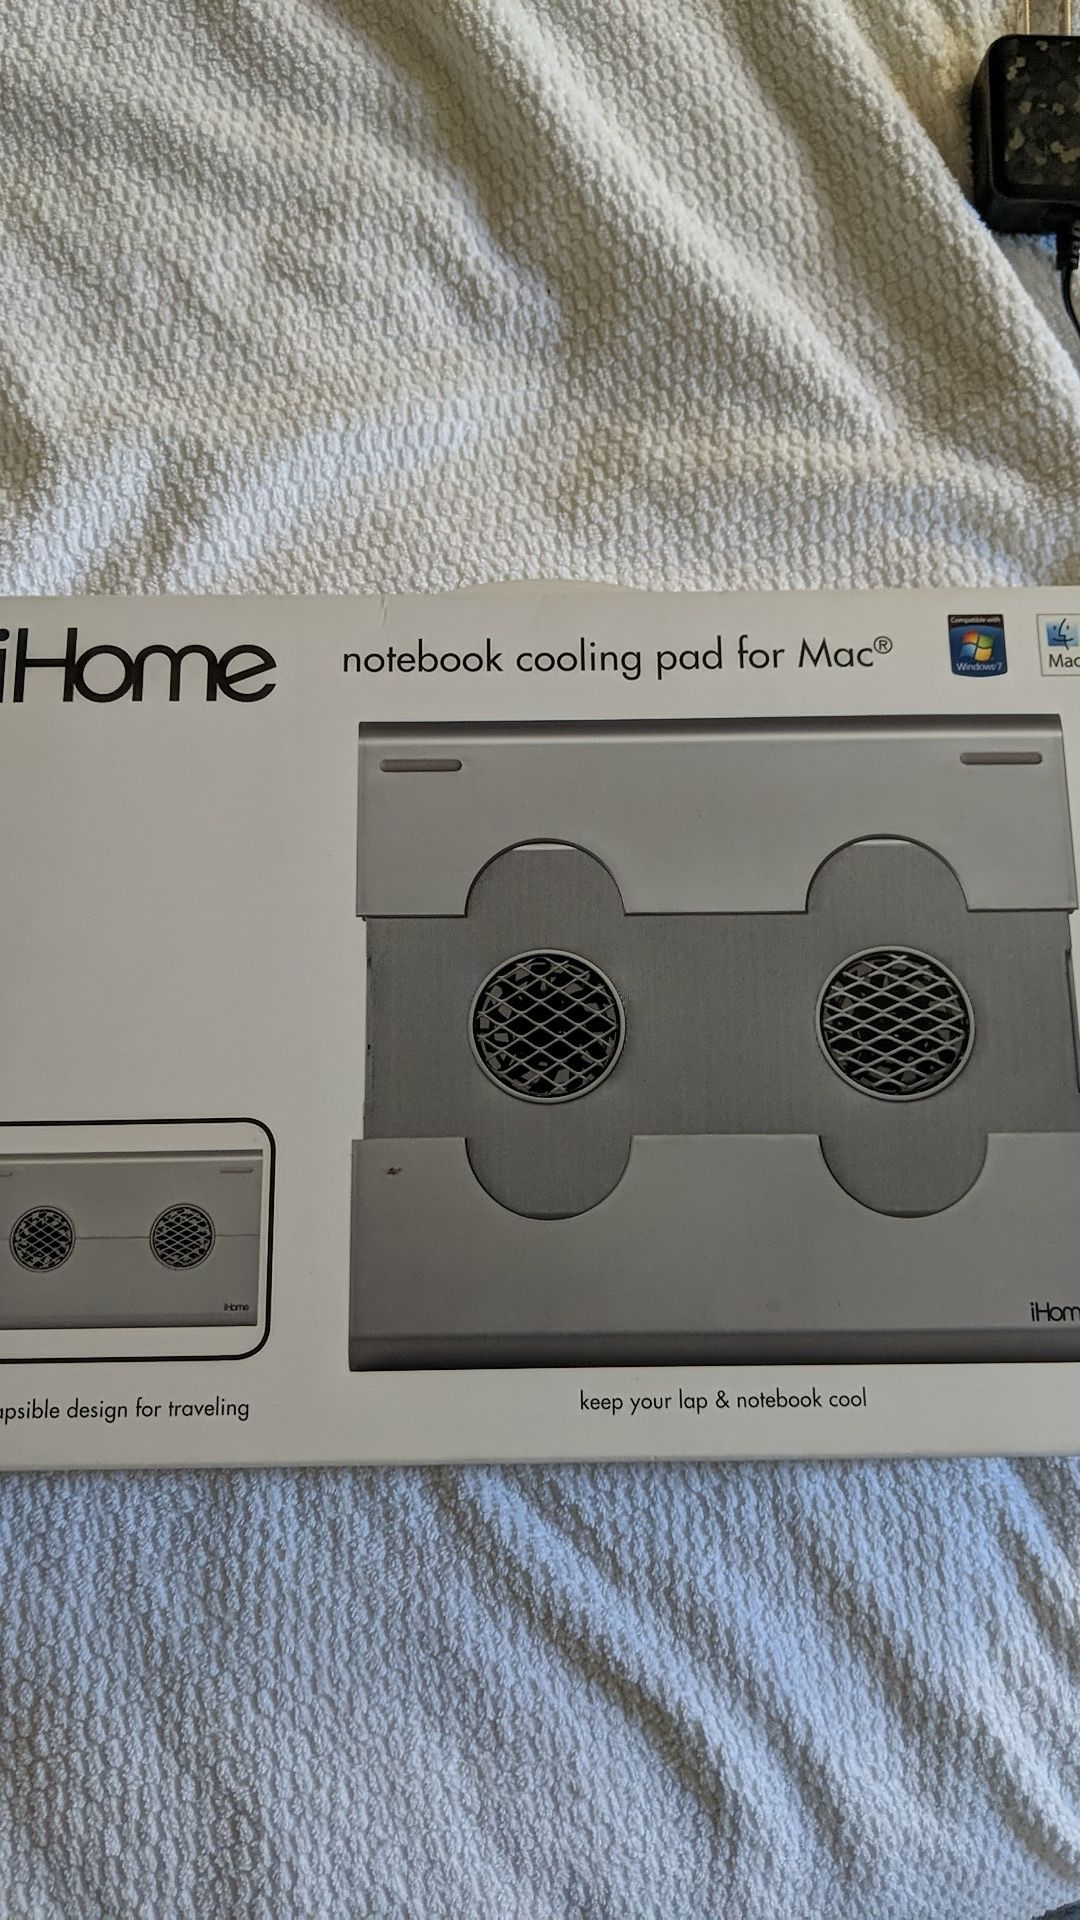 iHome notebook cooling pad for a Mac new in box